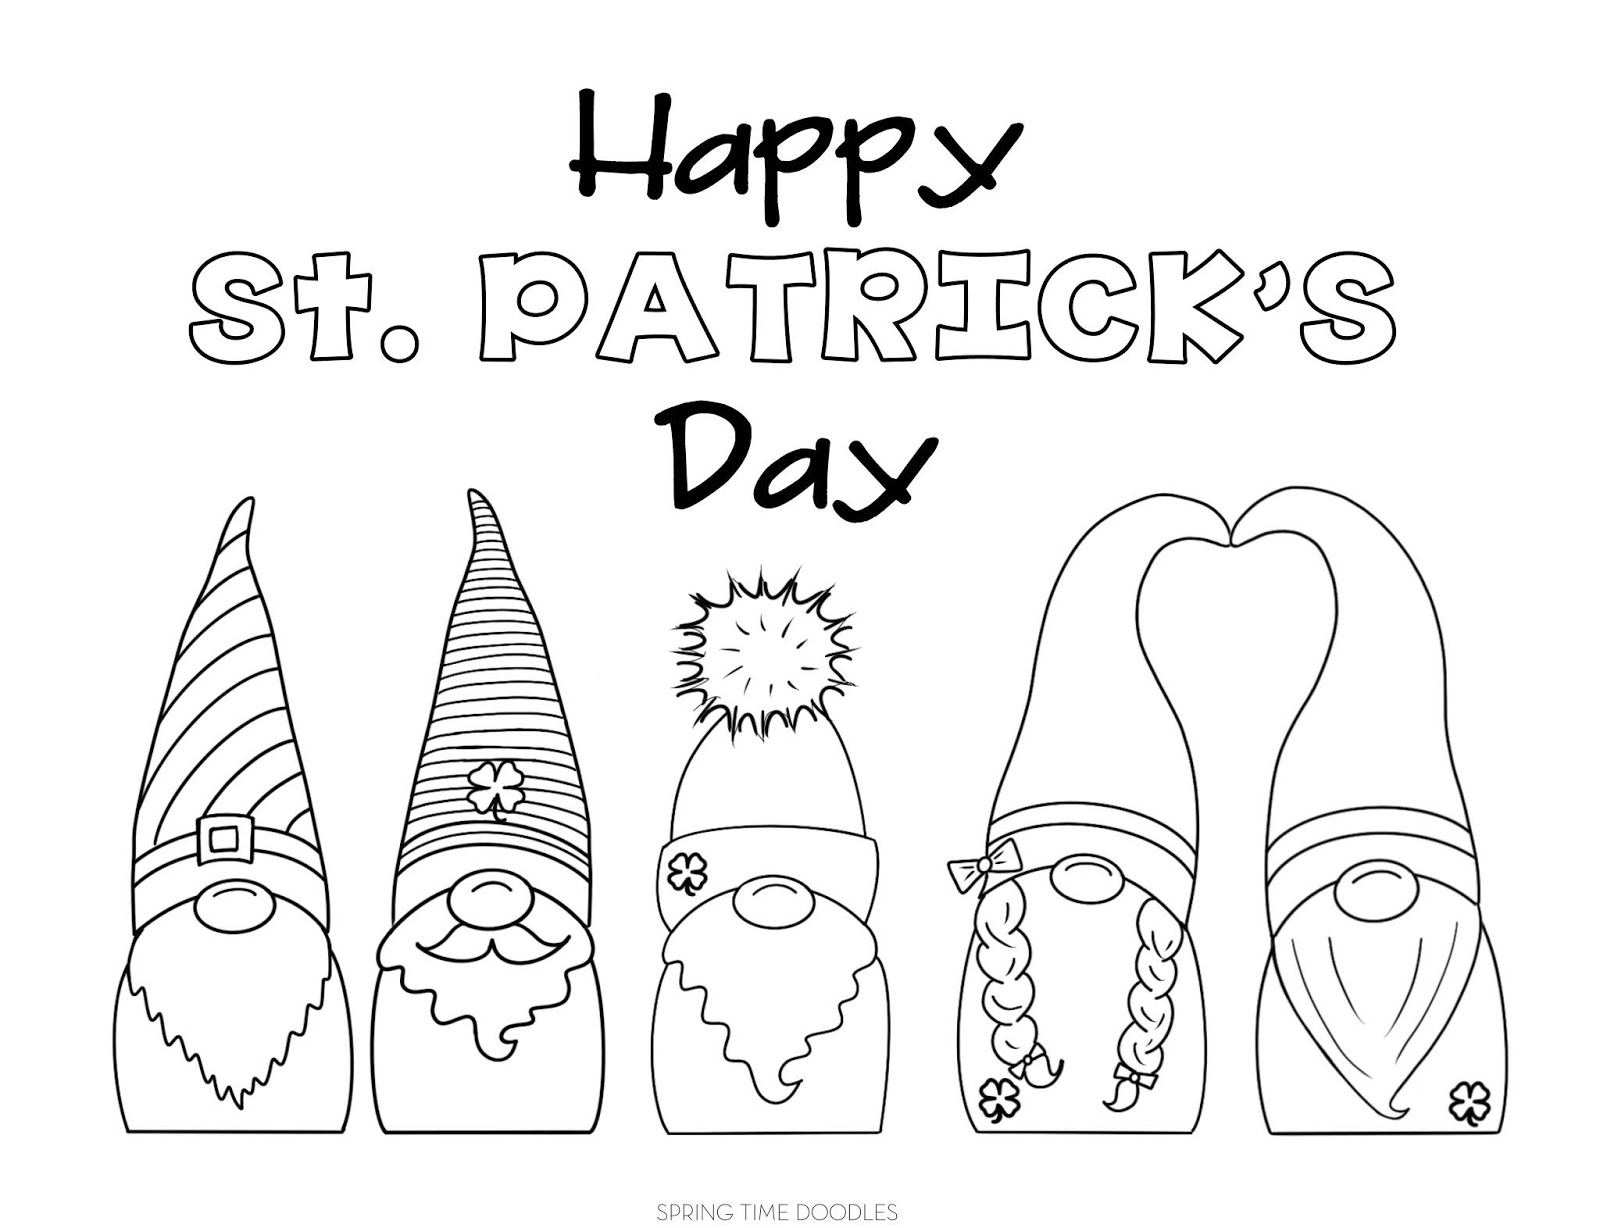 st-patrick-s-day-2020-free-coloring-pages-spring-time-doodles